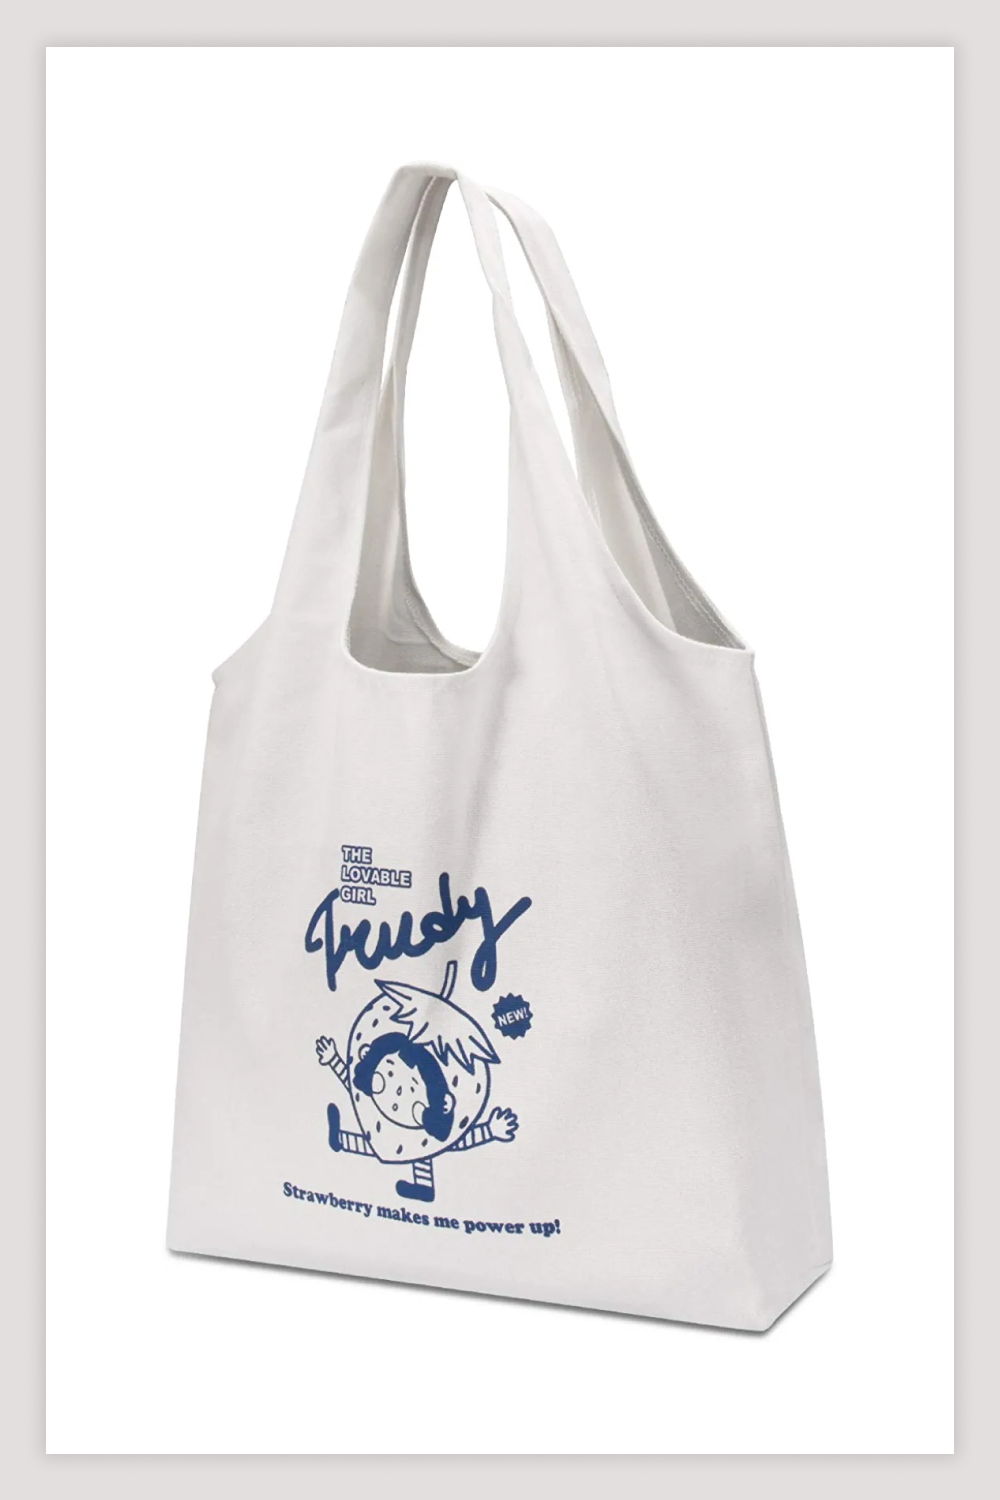 White Canvas Tote Bags with Inner Pocket Reusable Grocery Bag.